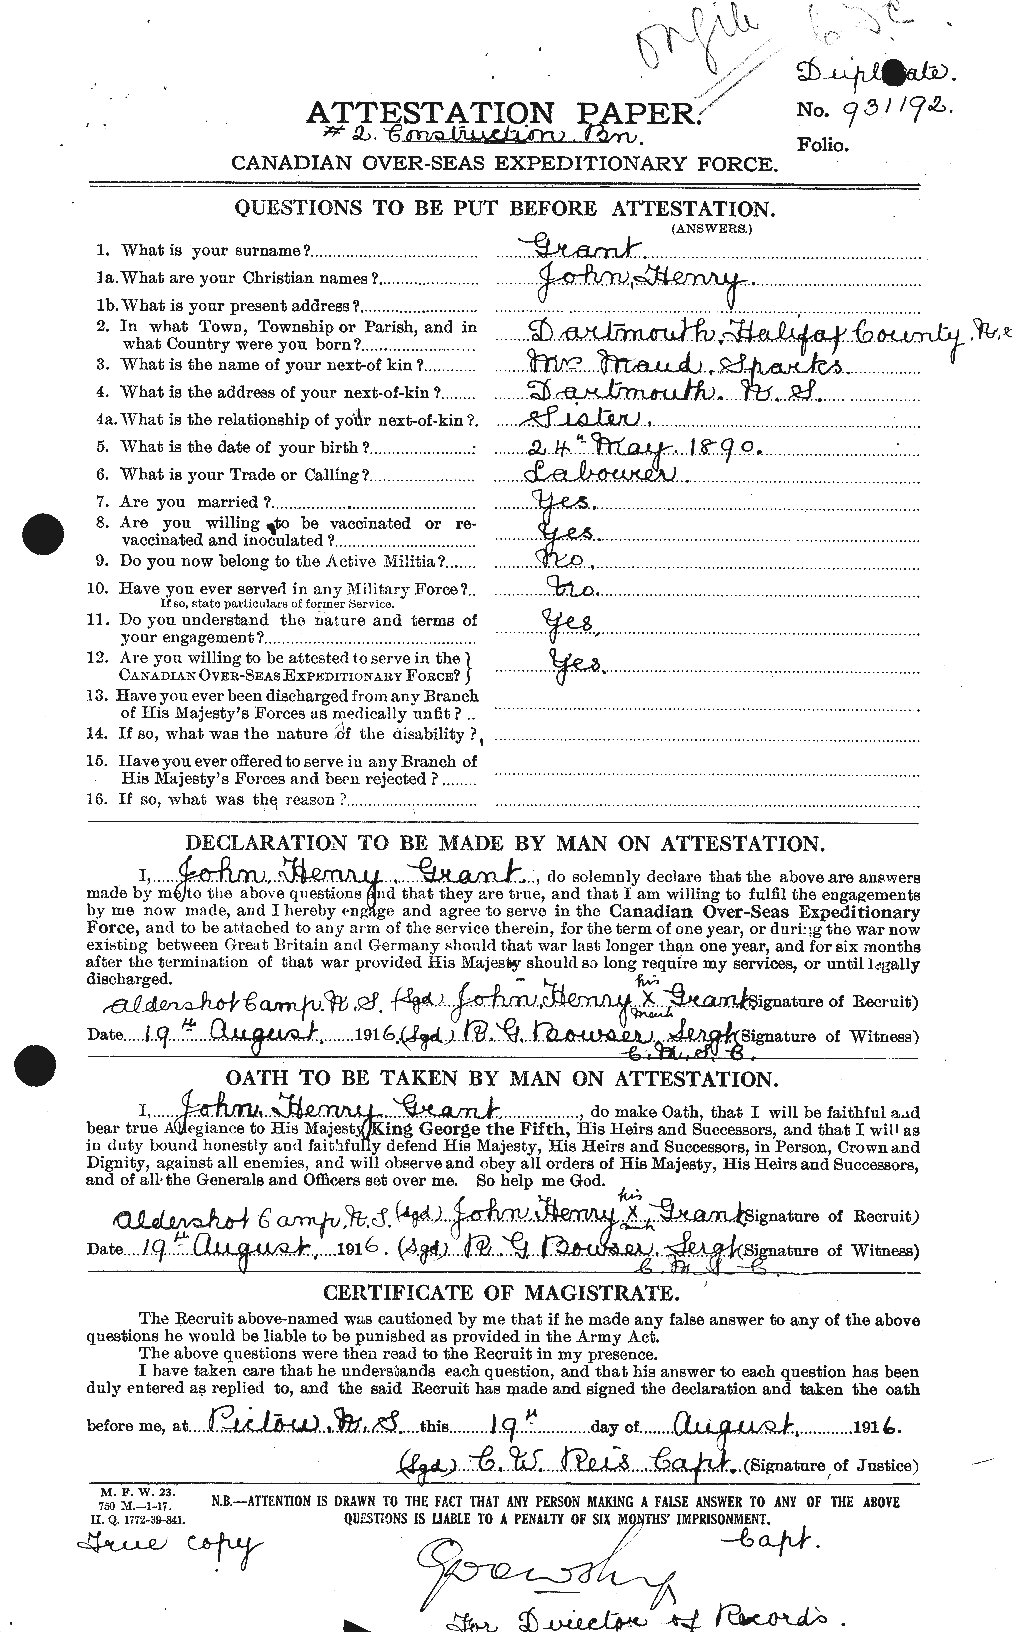 Personnel Records of the First World War - CEF 360946a